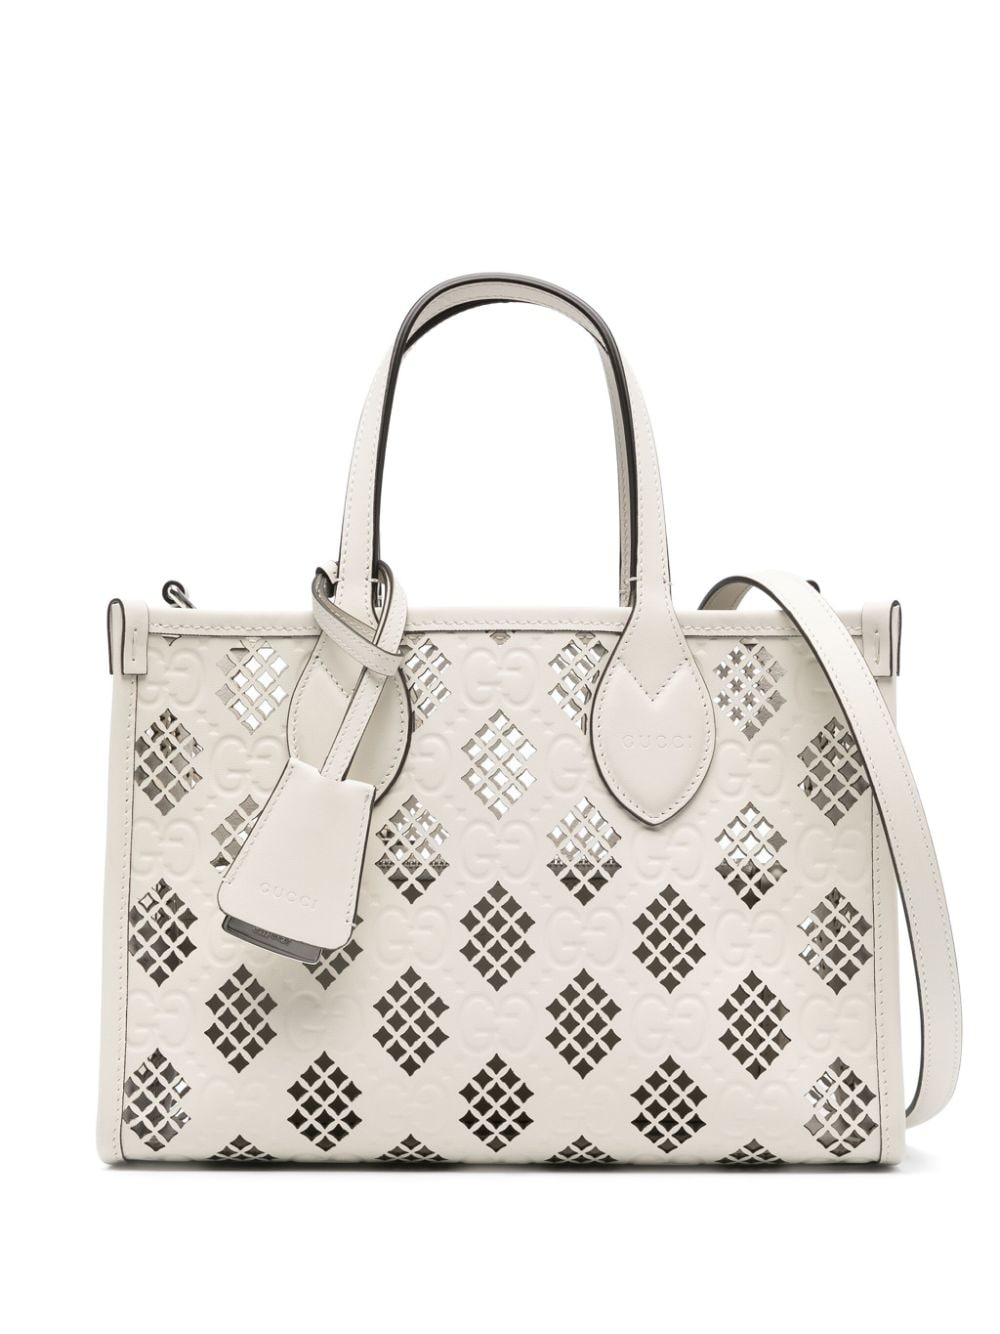 Gucci Ophidia Tote Bag In White